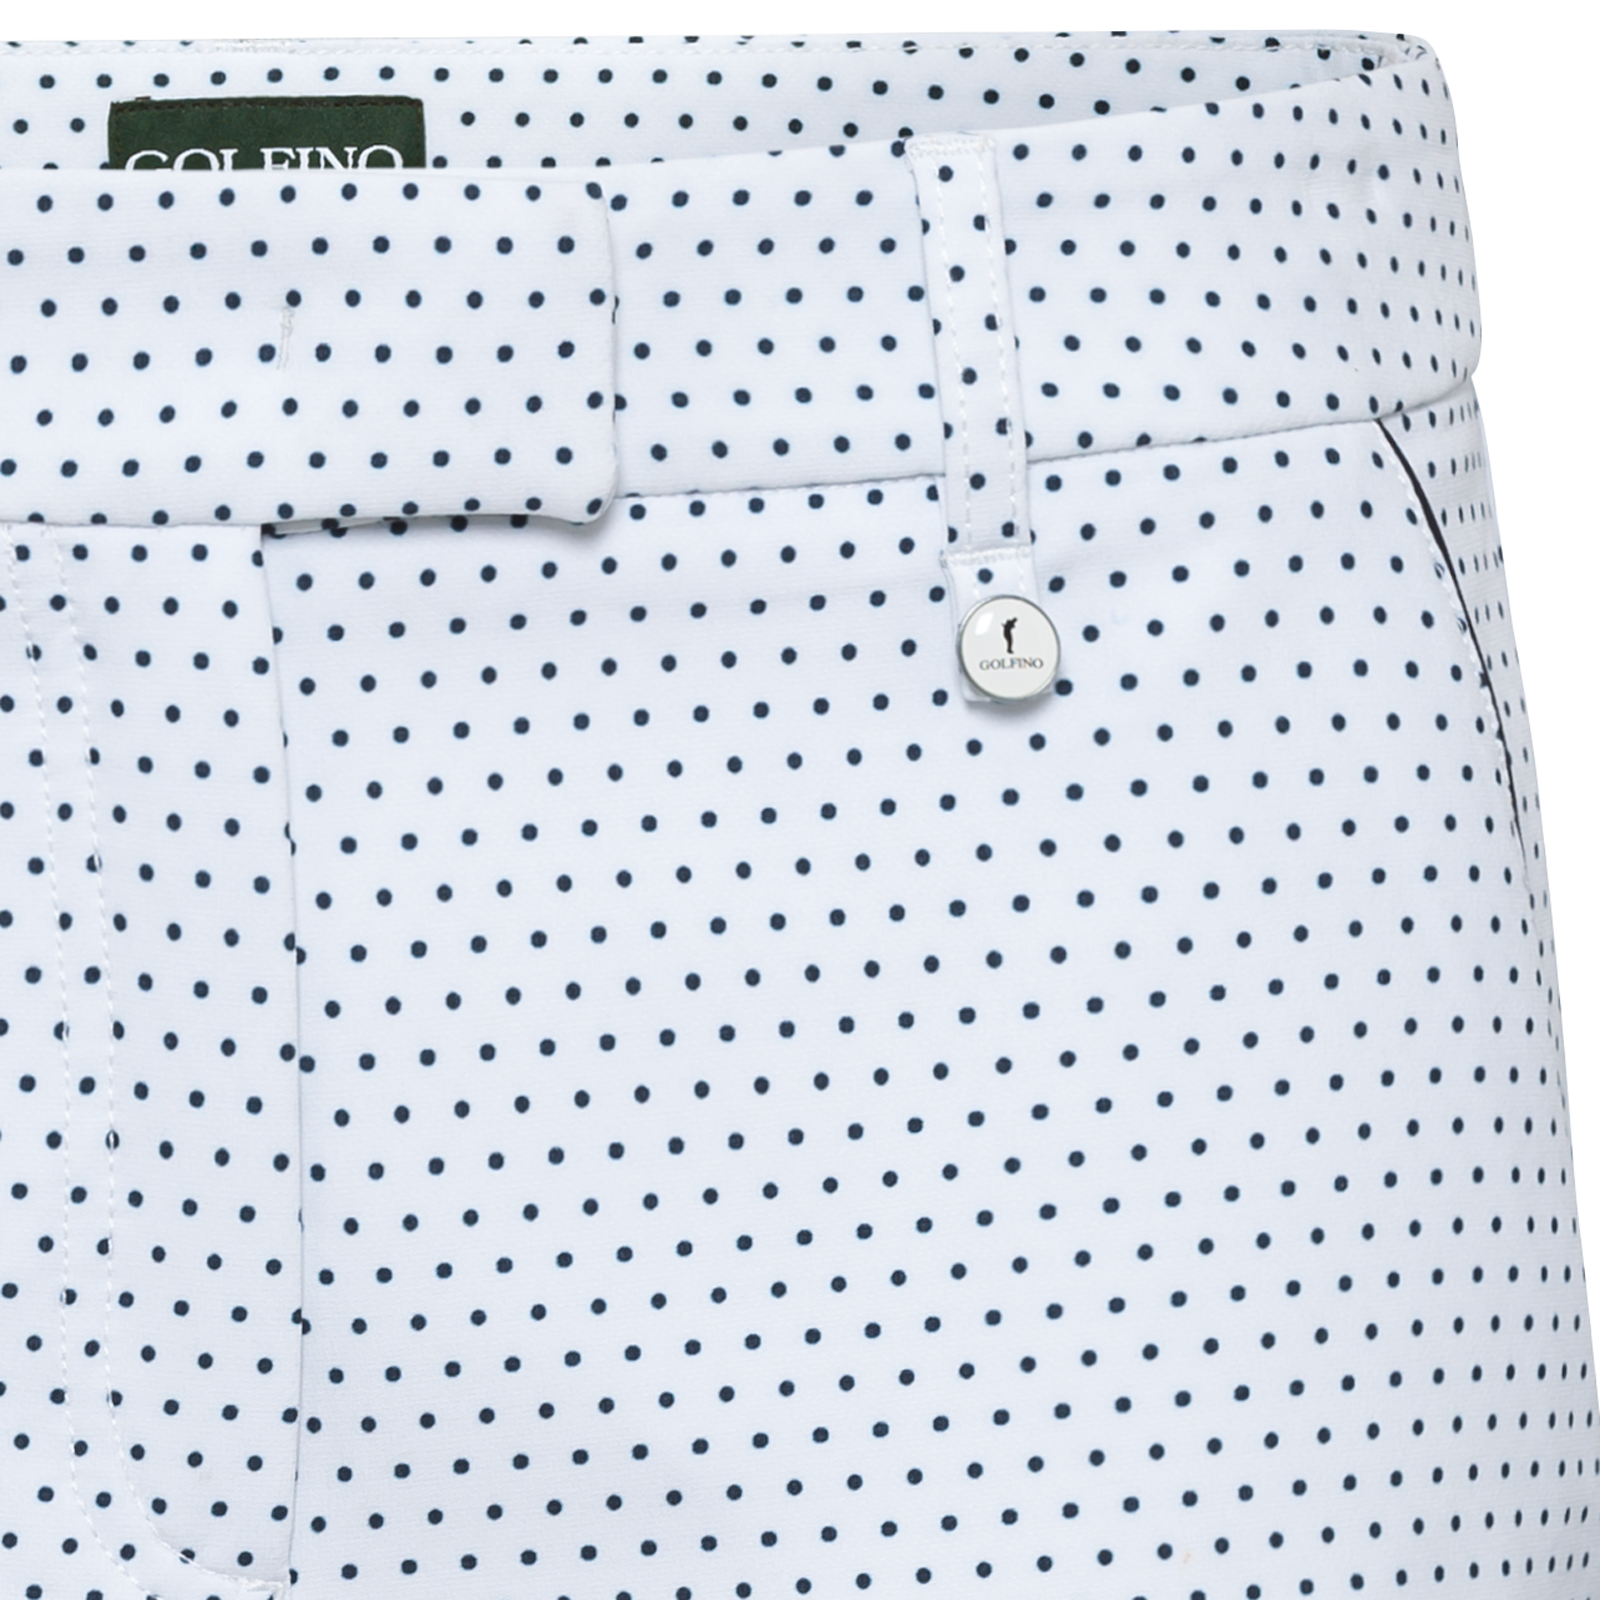 Water-repellent ladies' Bermuda shorts for the golf course